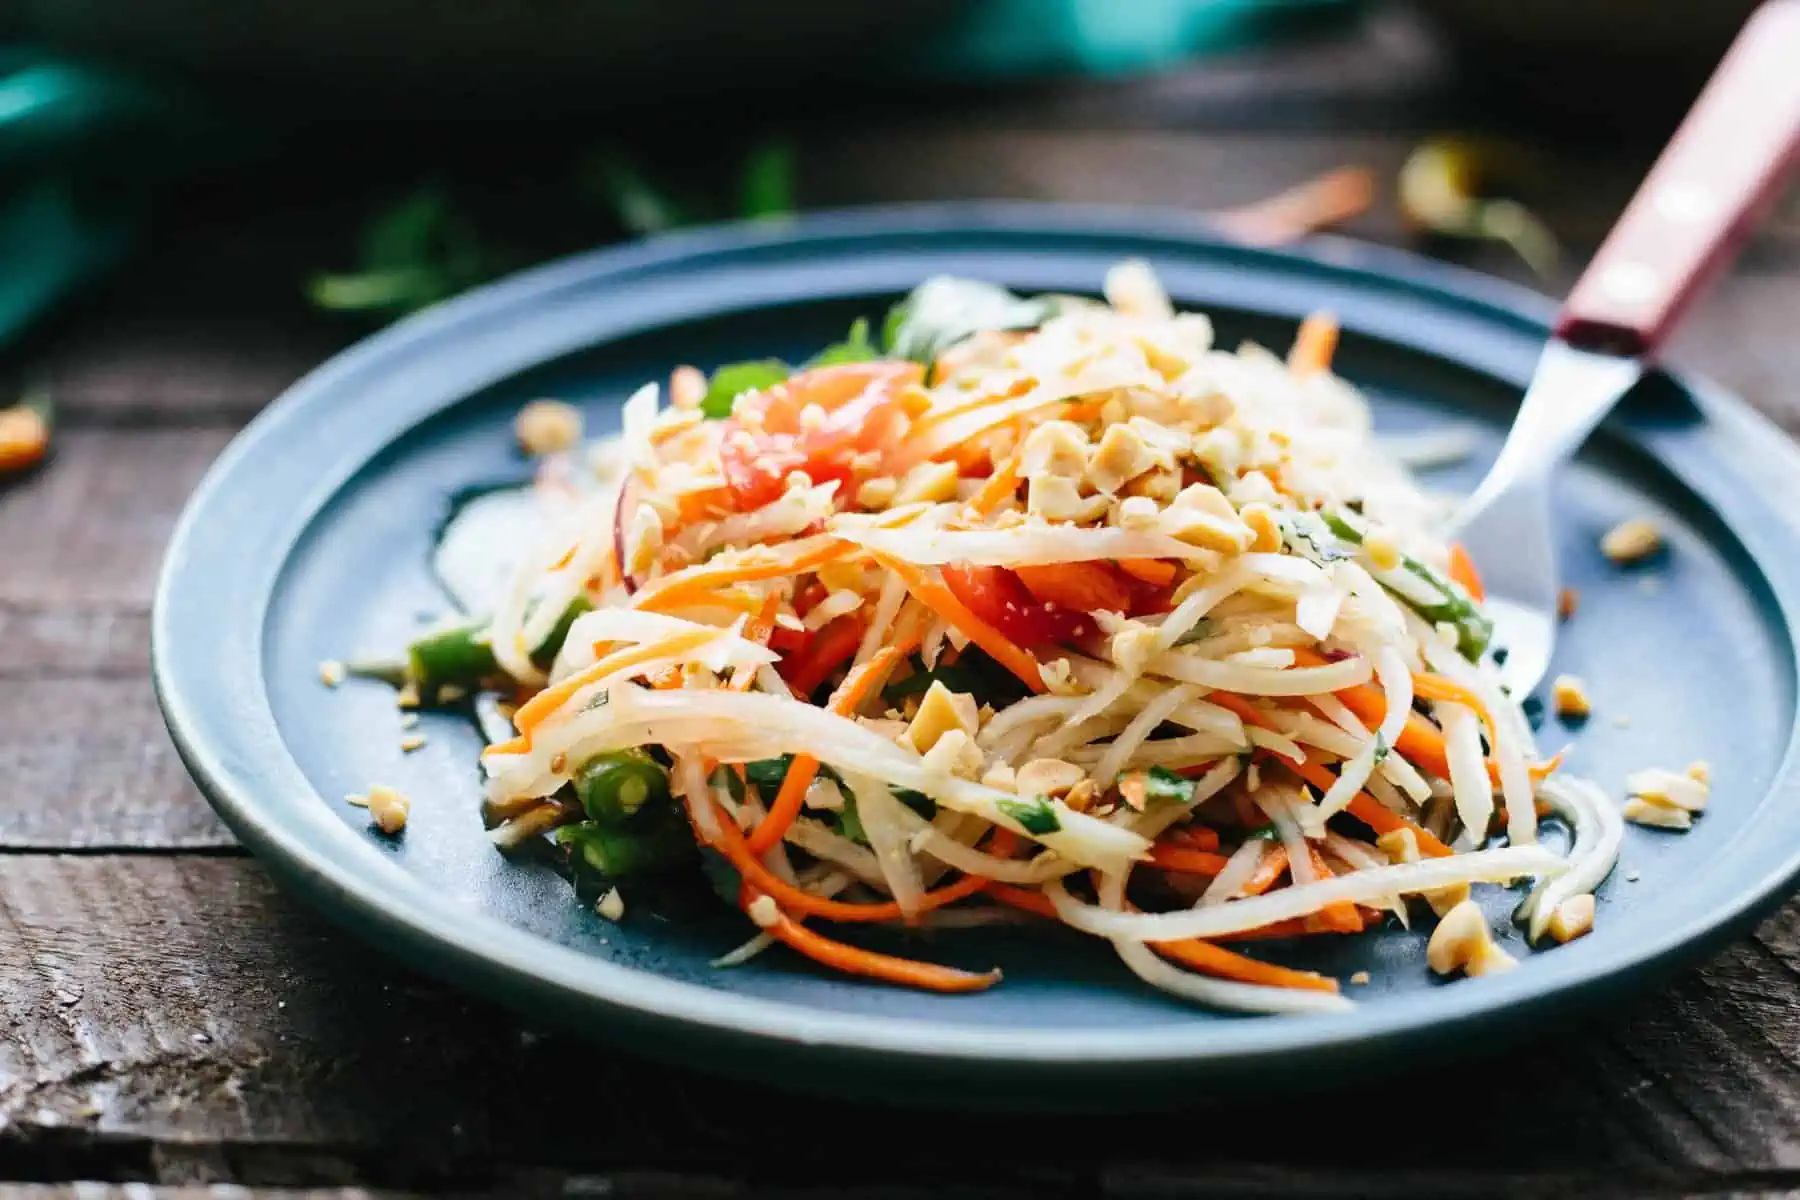 Side view of a plate piled with shredded Thai green papaya salad.